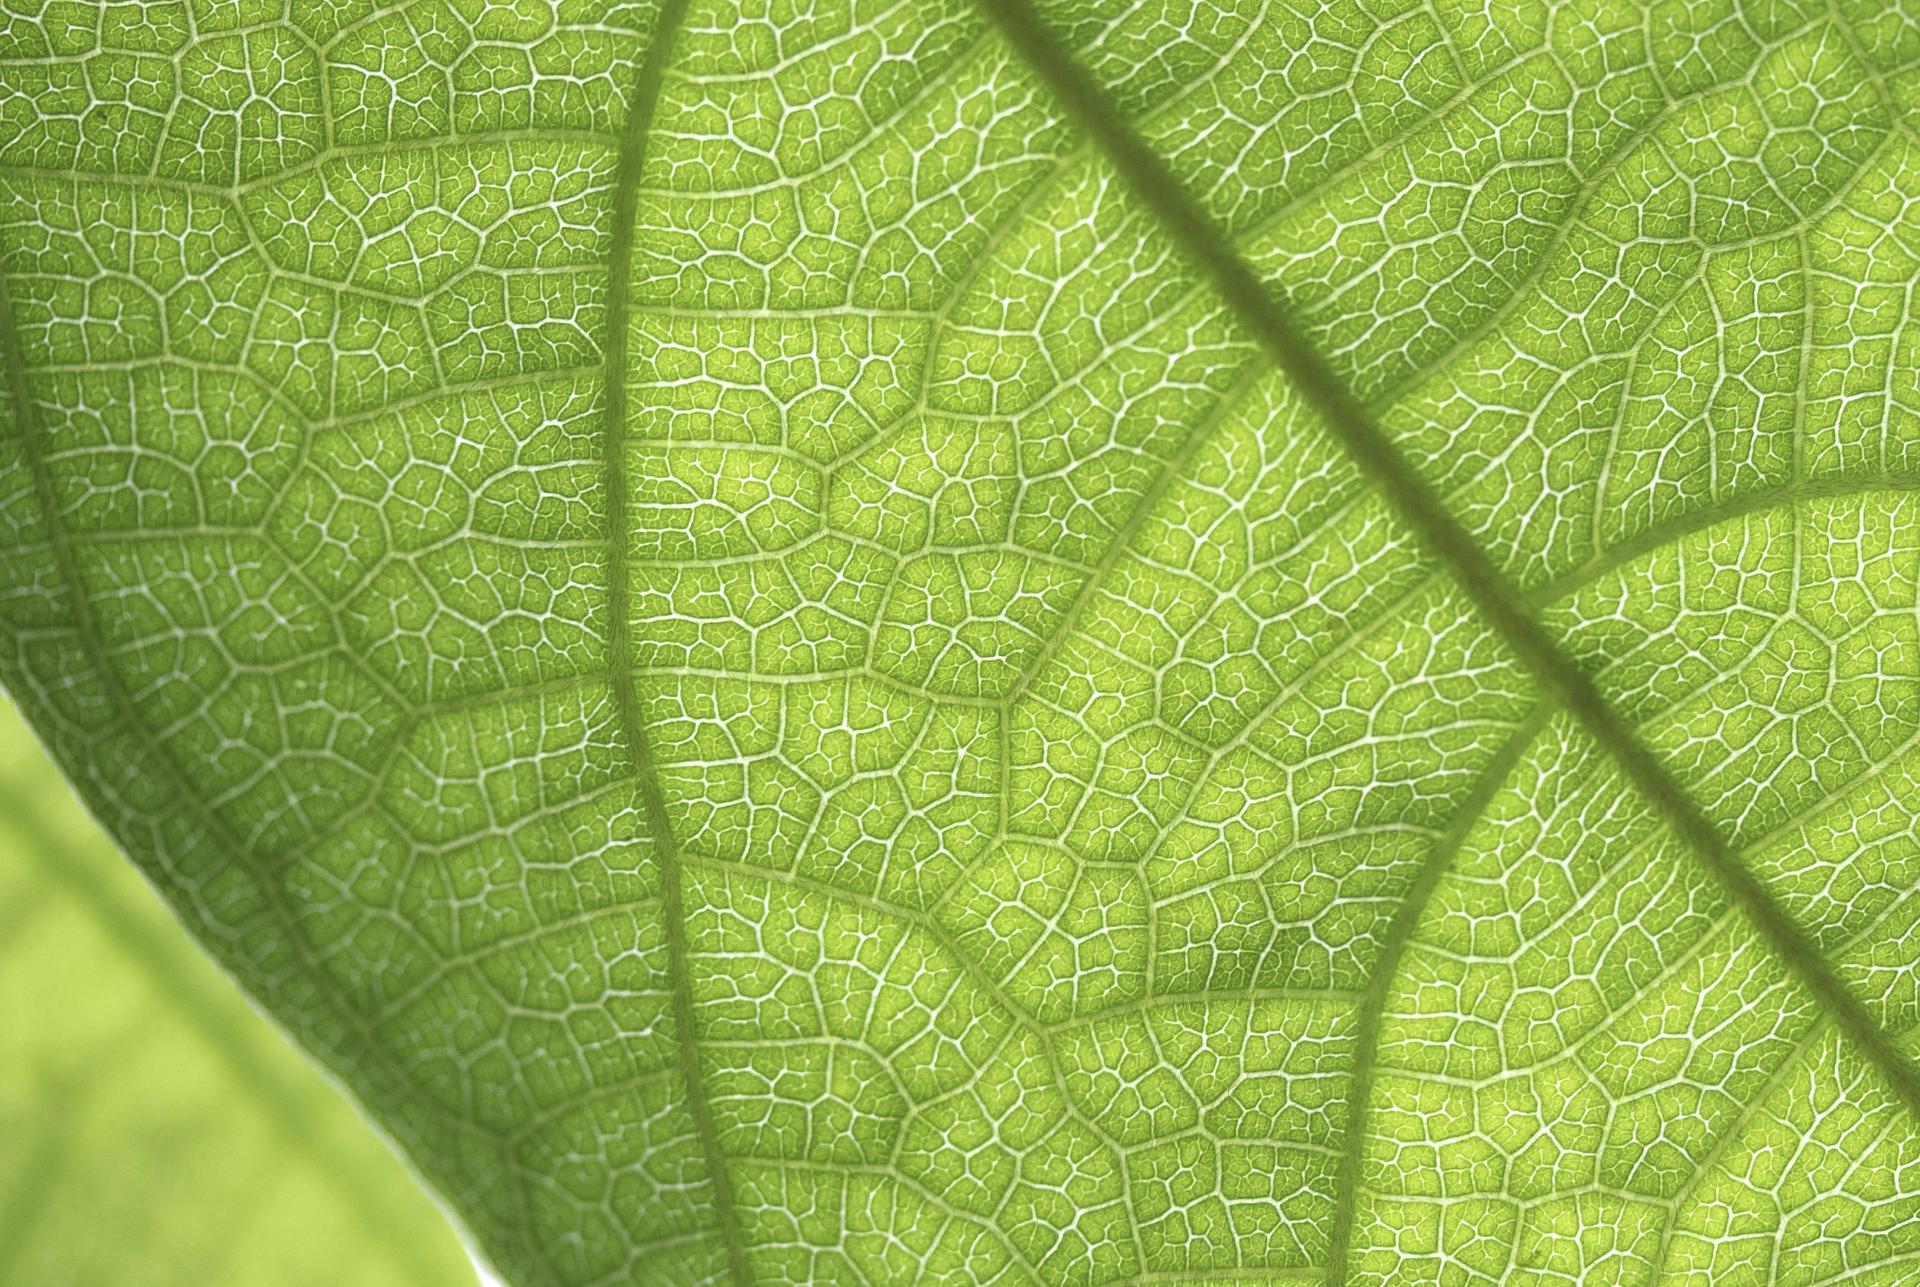 Cell Structure of a Leaf